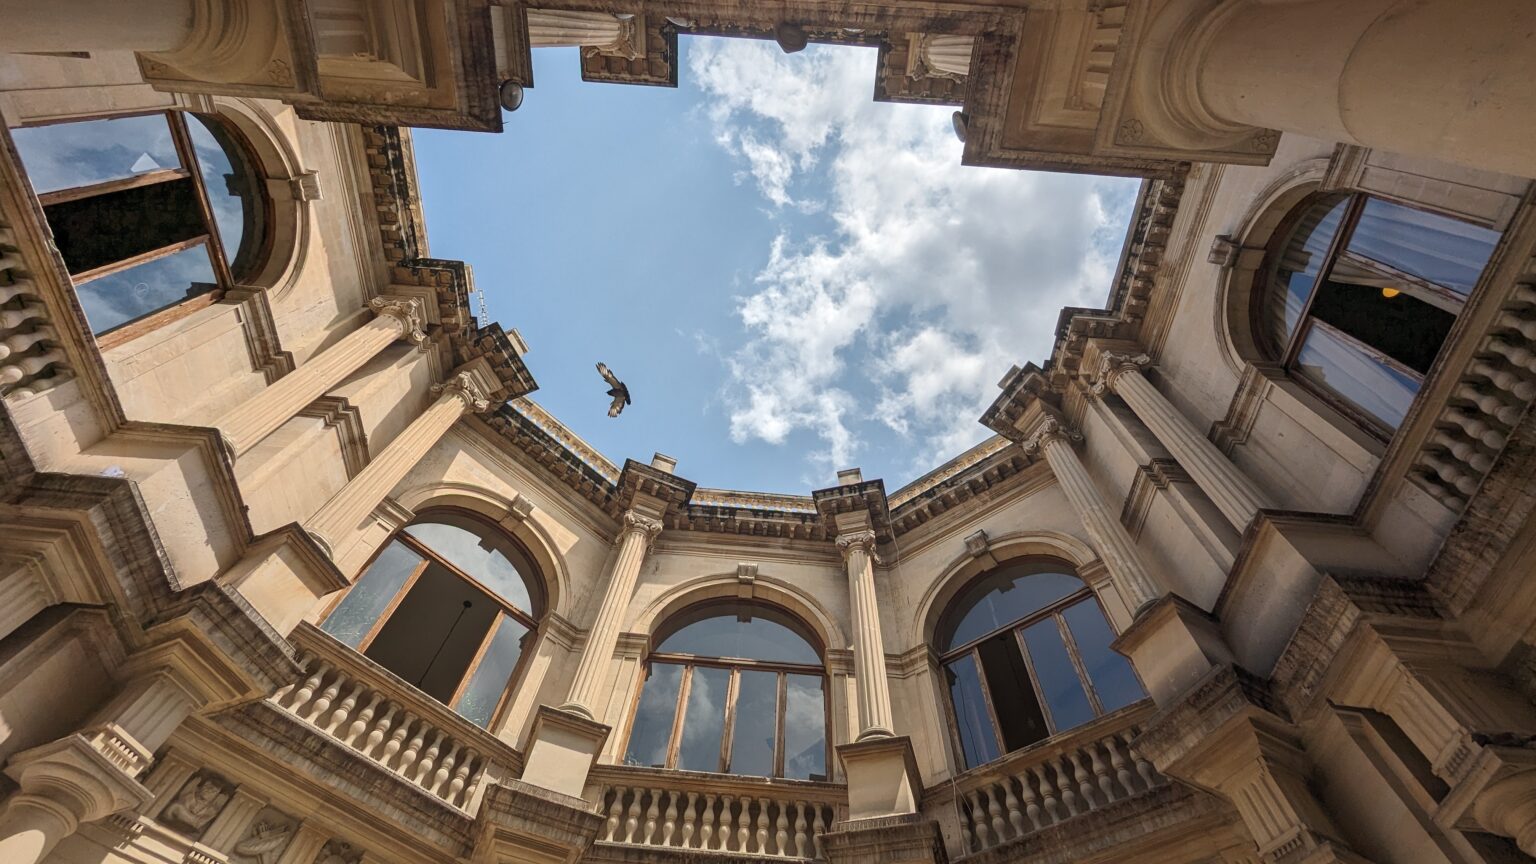 Looking up at the sky through the courtyard of Heraklion's Venetian Loggia with a bird flying overhead.